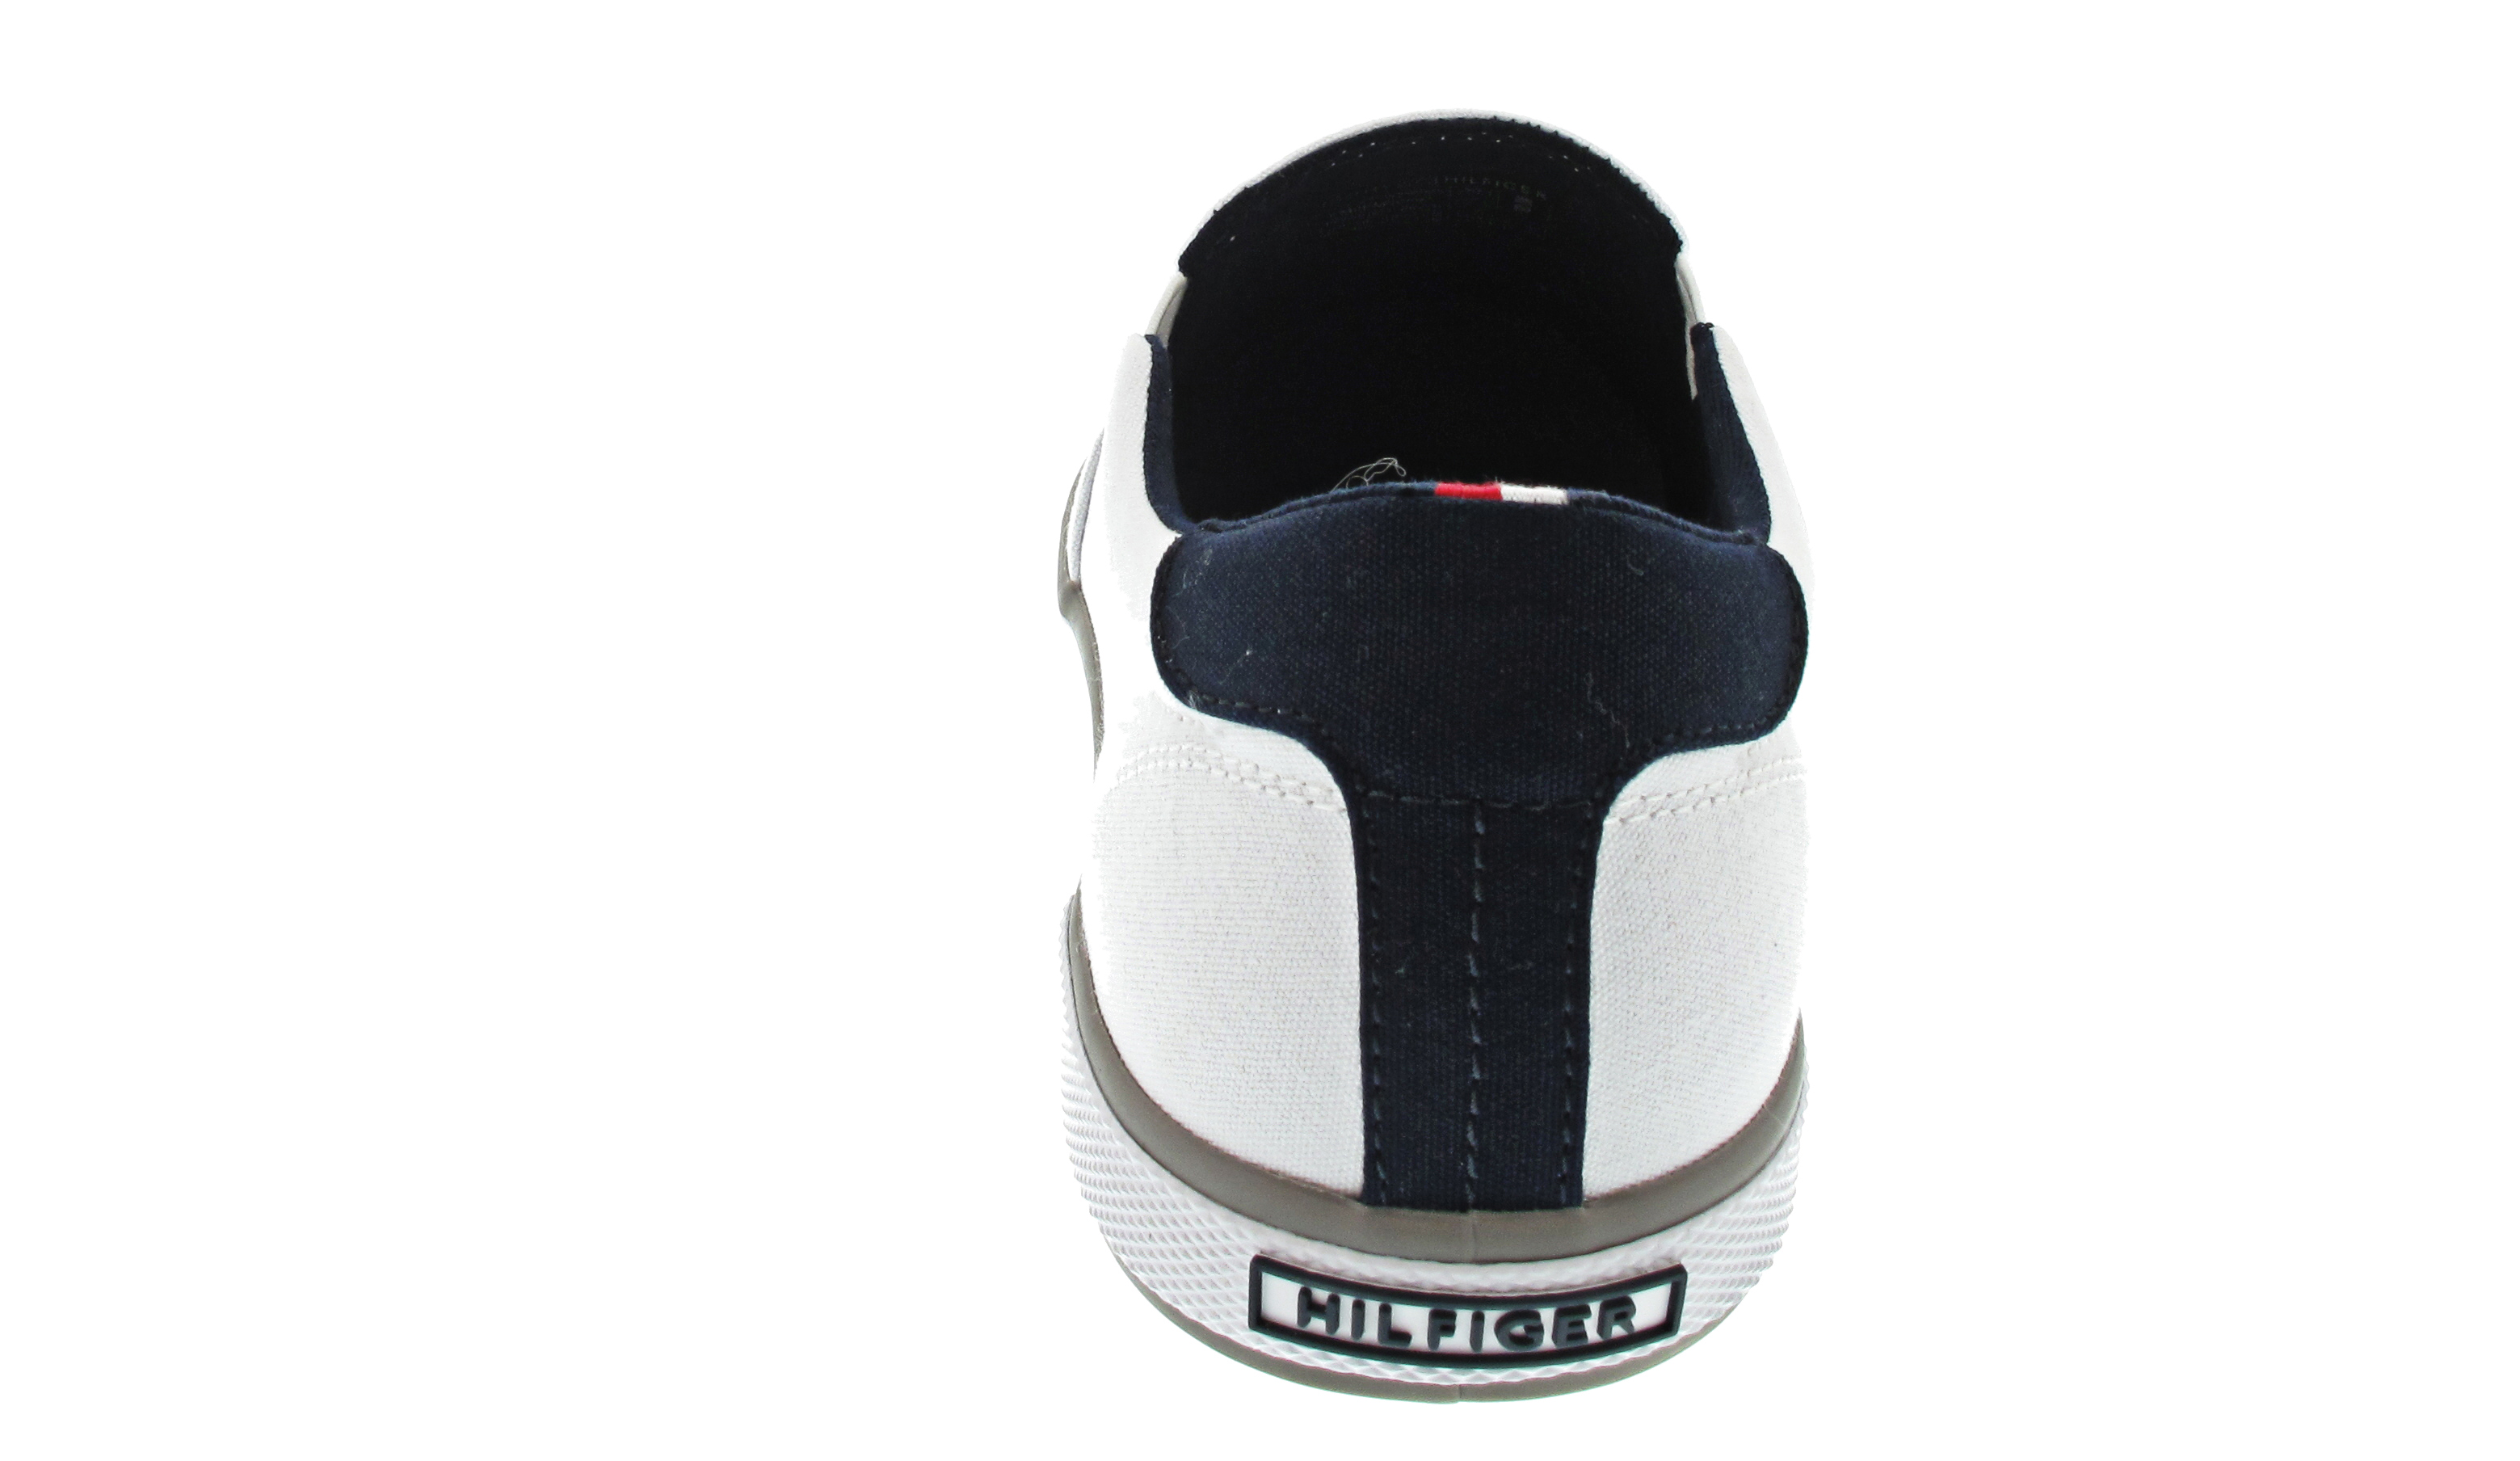 Tommy Hilfiger Iconic Slip on Sneaker